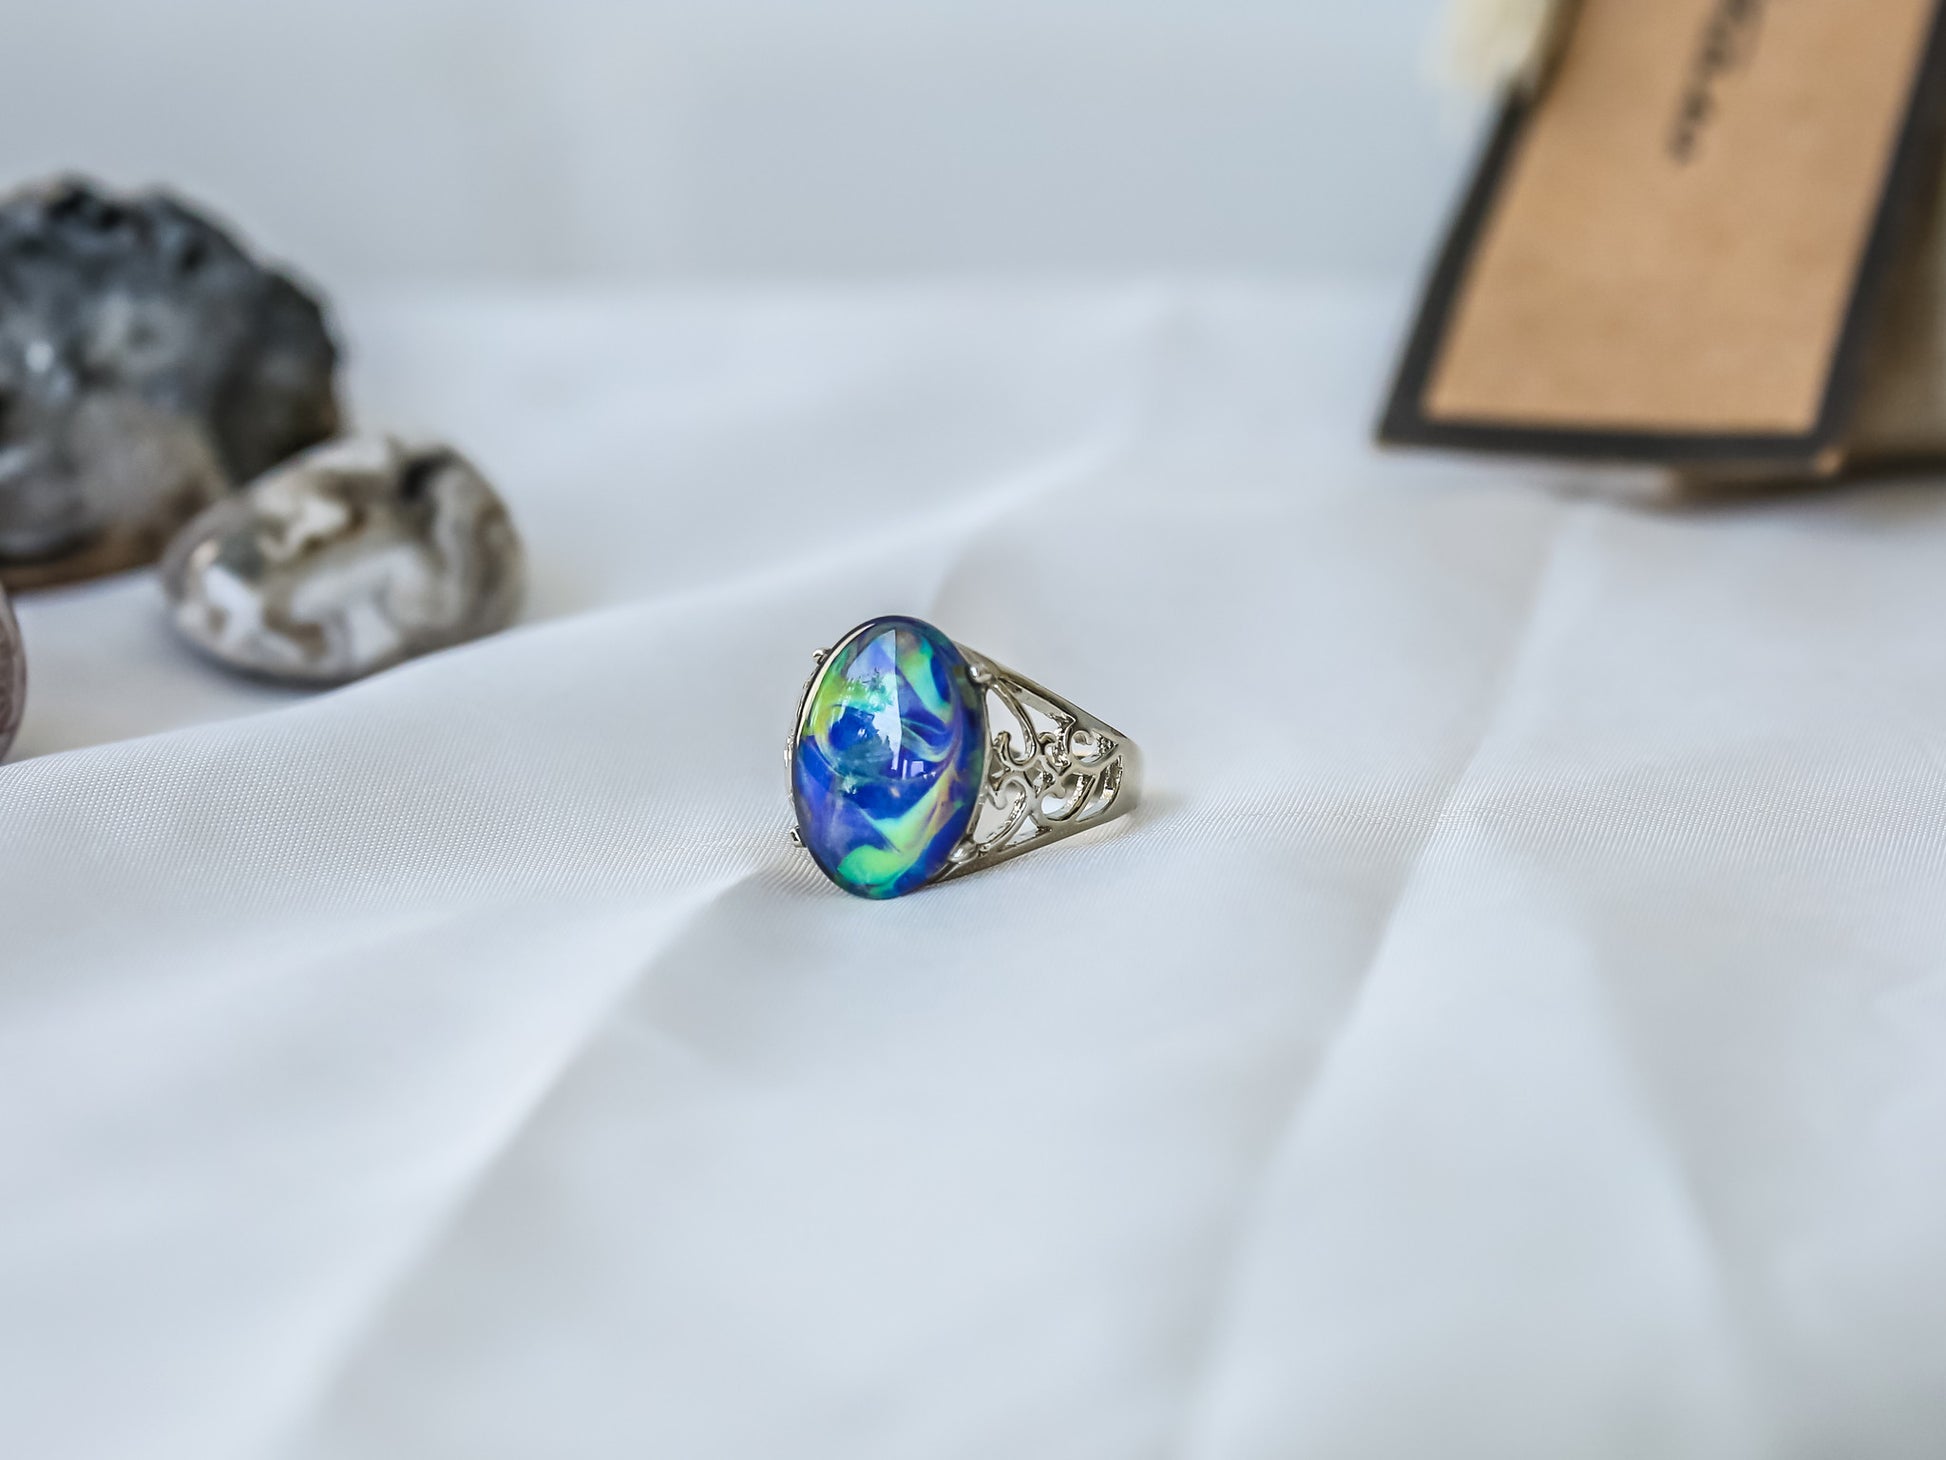 Limited Edition Borderless Opalescent Oval Stone Mood Ring.